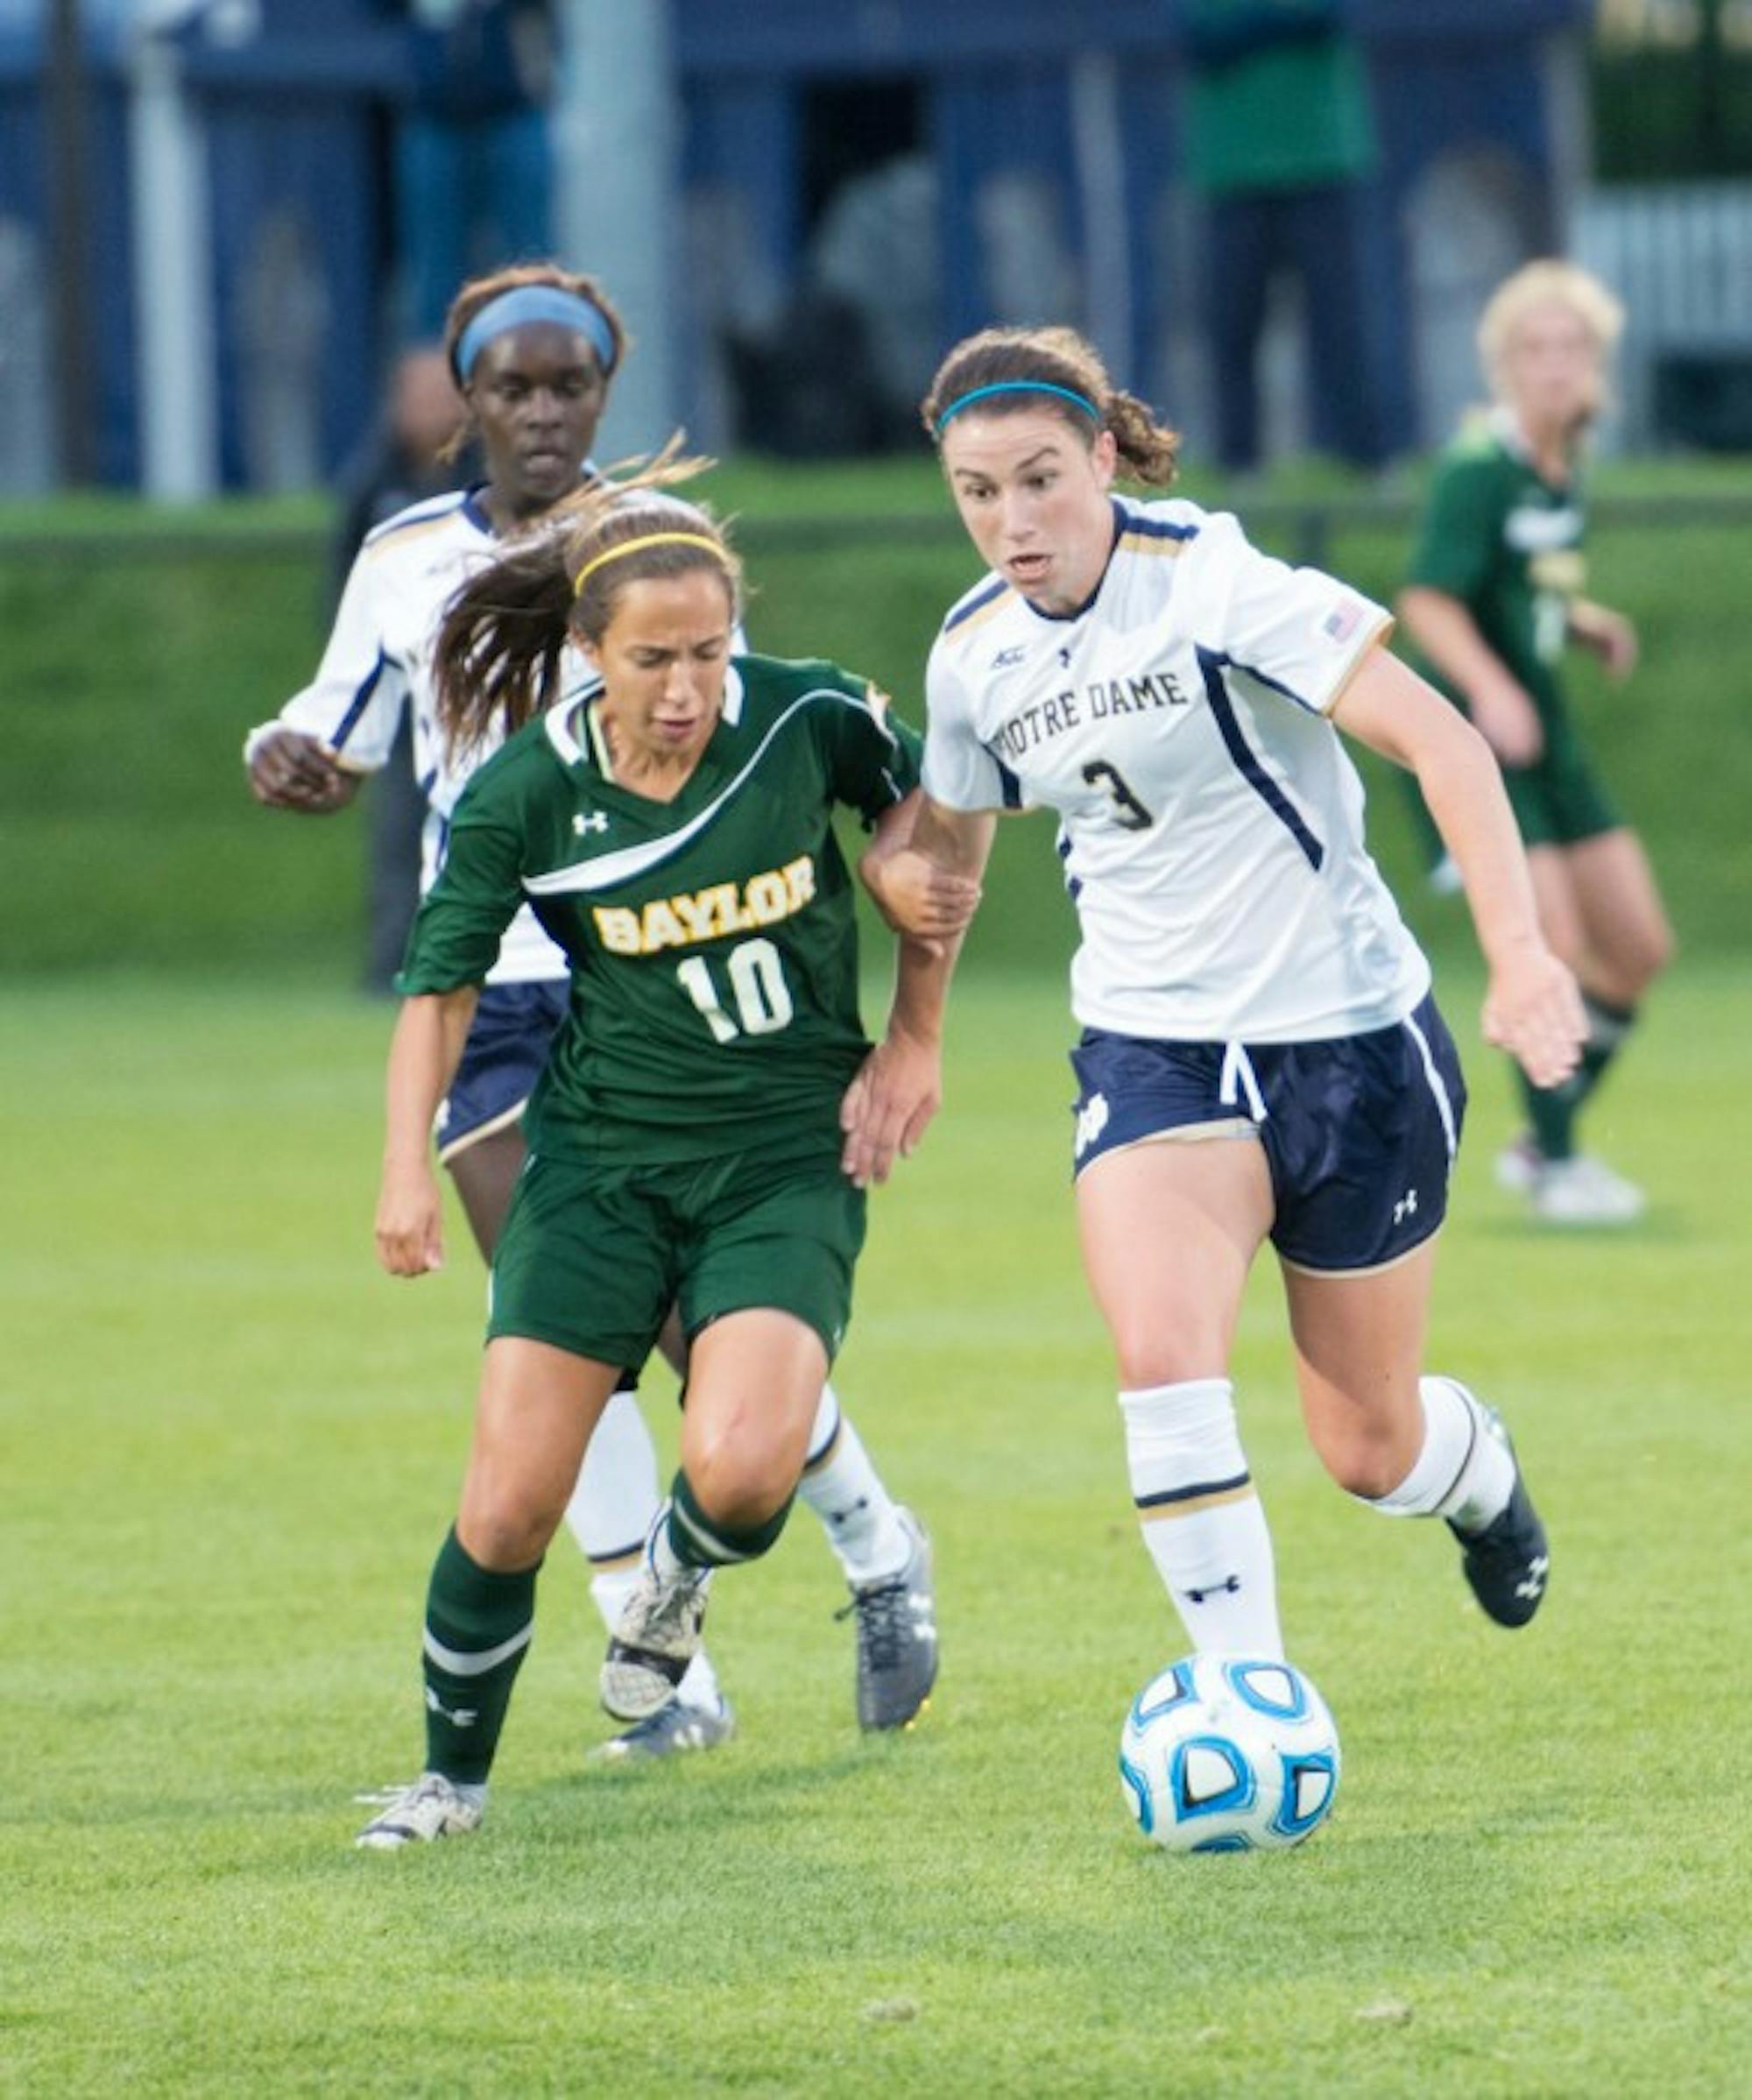 Irish sophomore midfielder Morgan Andrews battles with a defender for the ball during Notre Dame’s 1-0 victory over Baylor on Friday at Alumni Stadium.